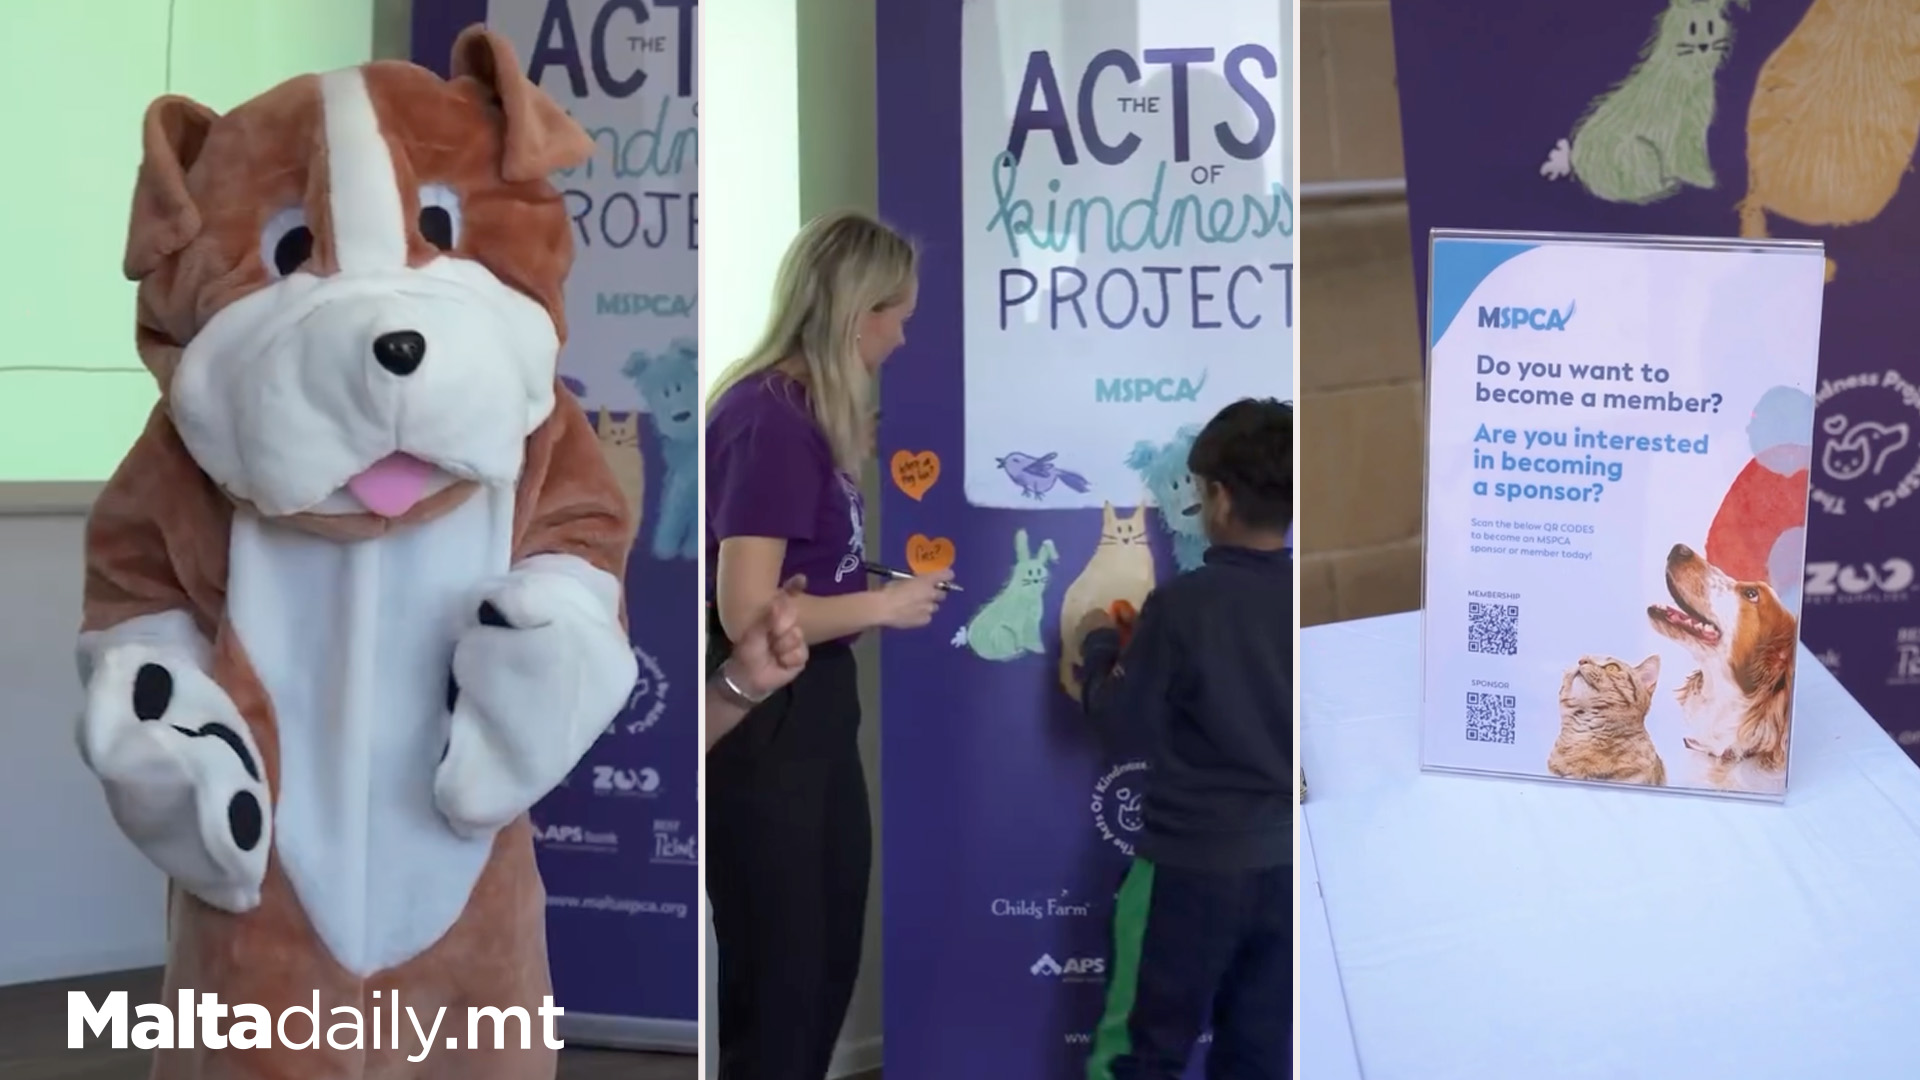 MSPCA's Acts Of Kindness Project